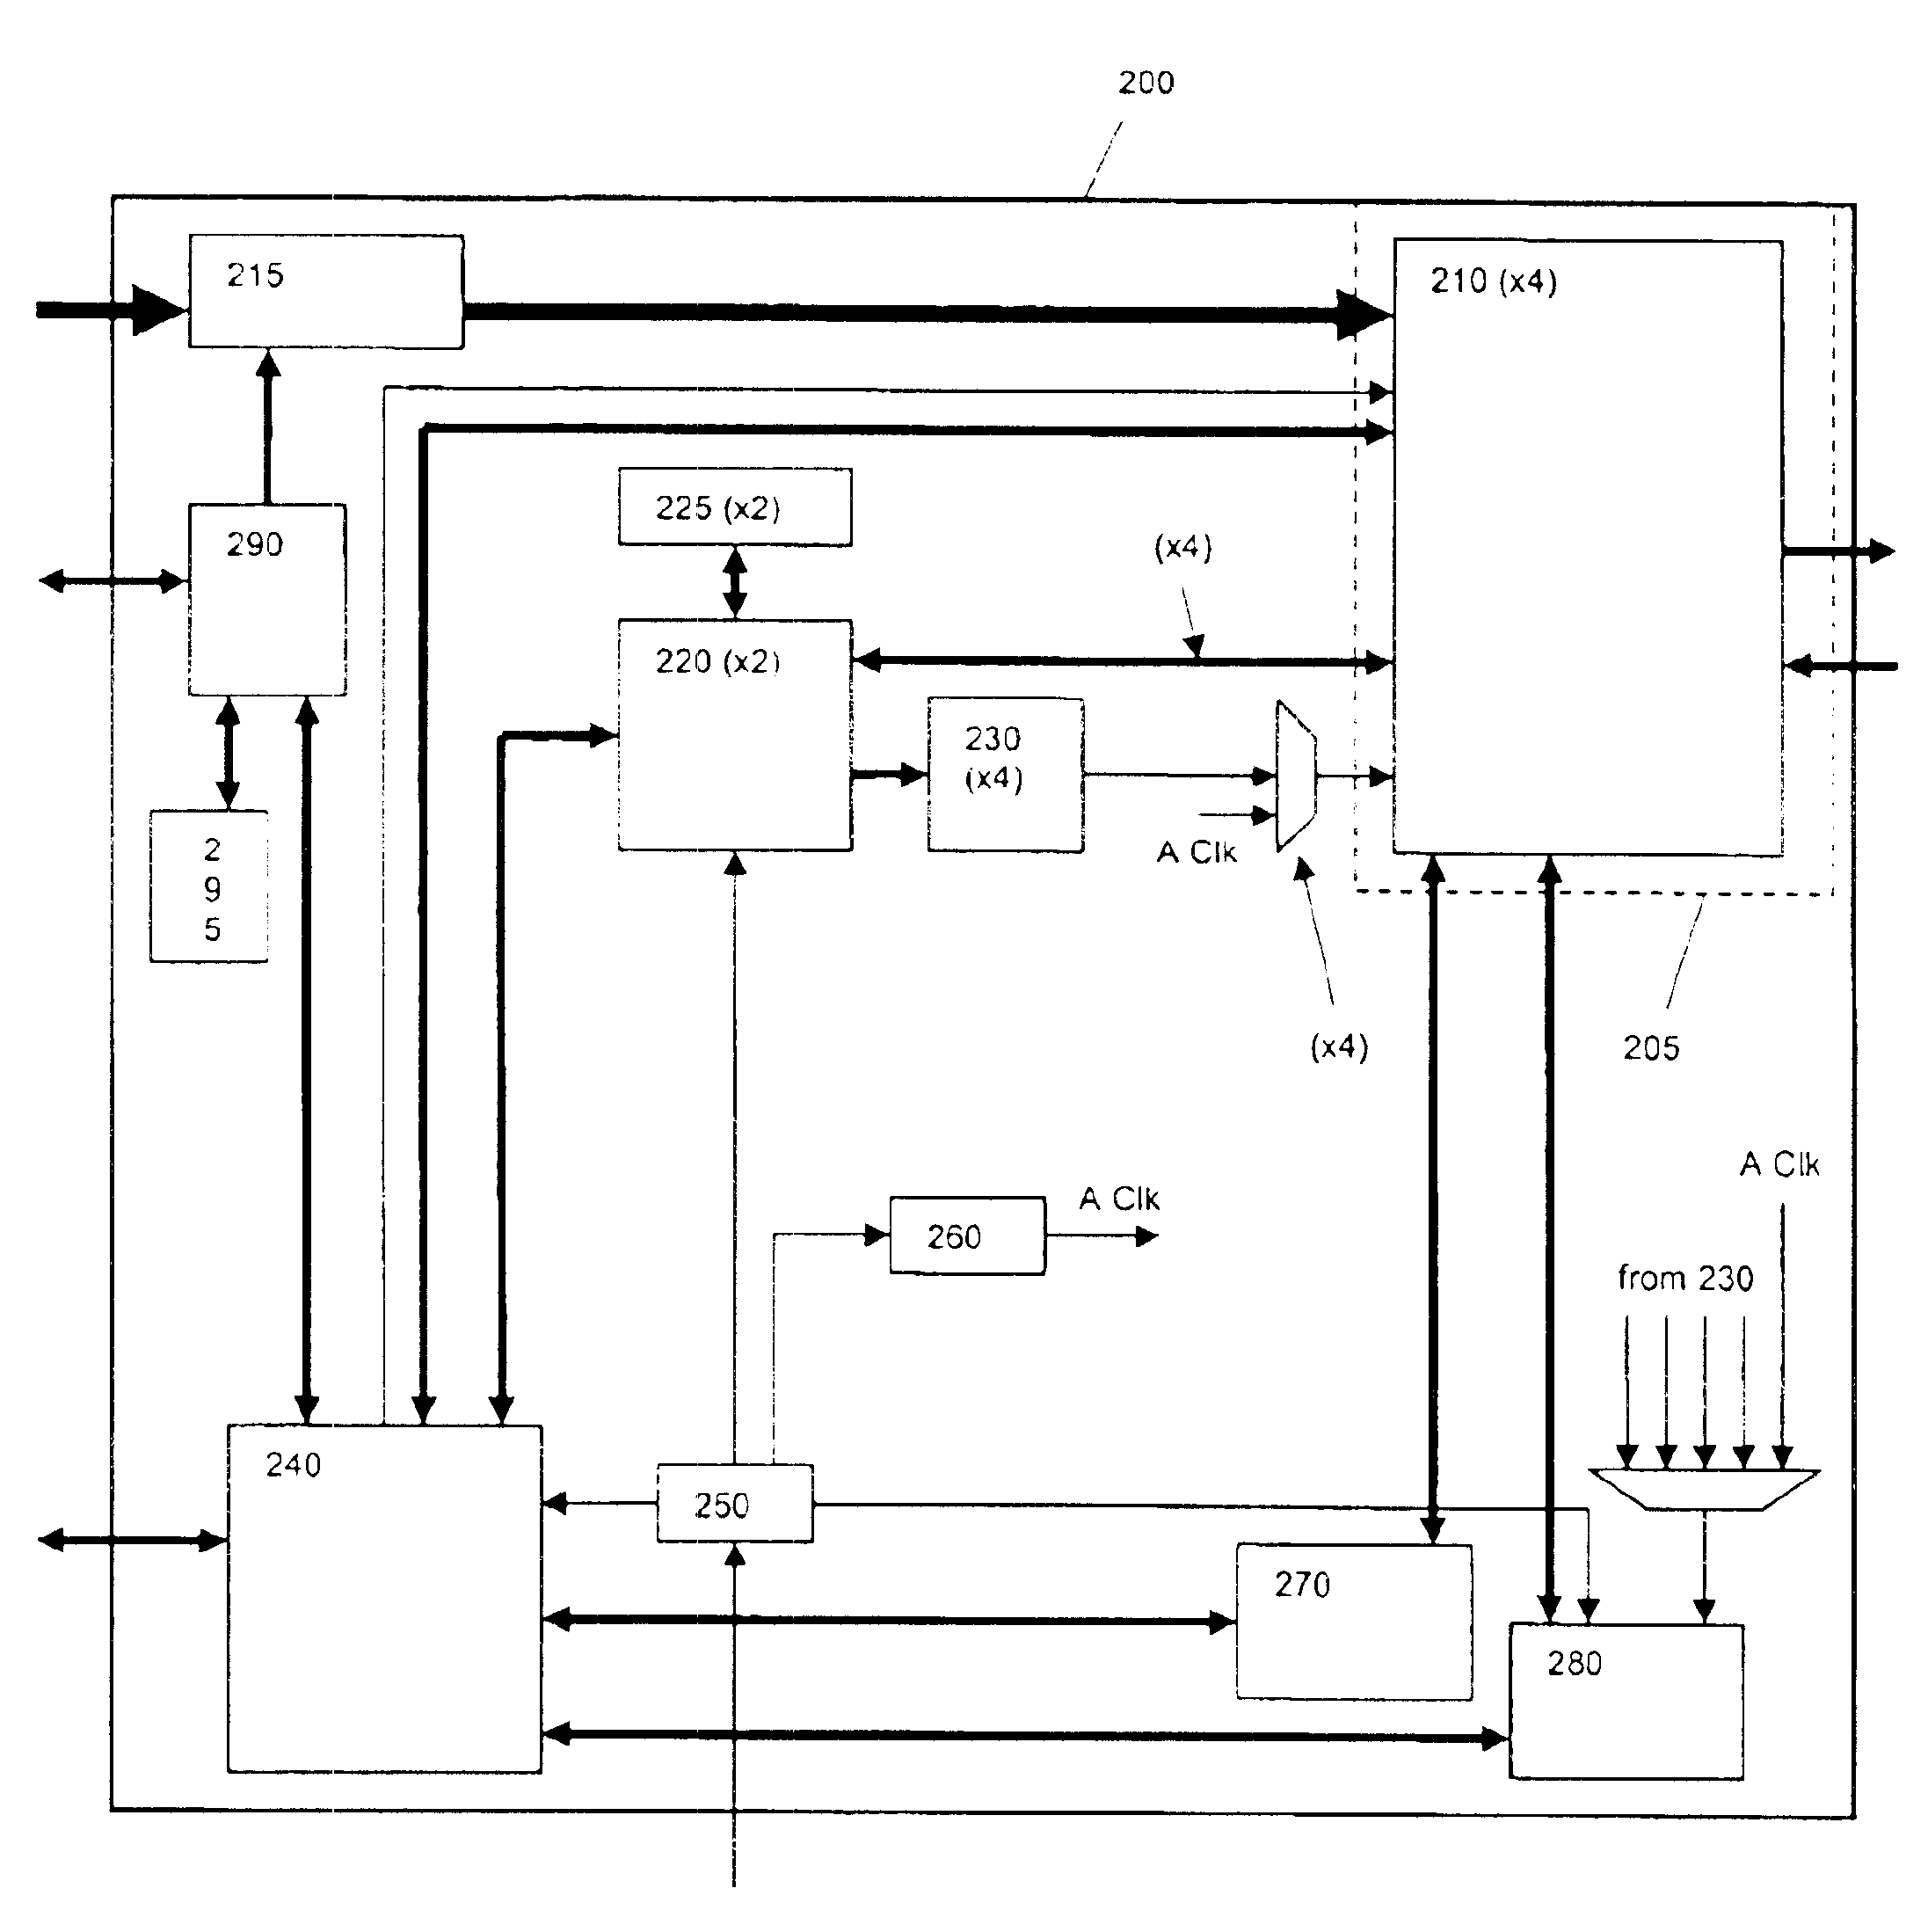 Test instrument with multiple analog modules